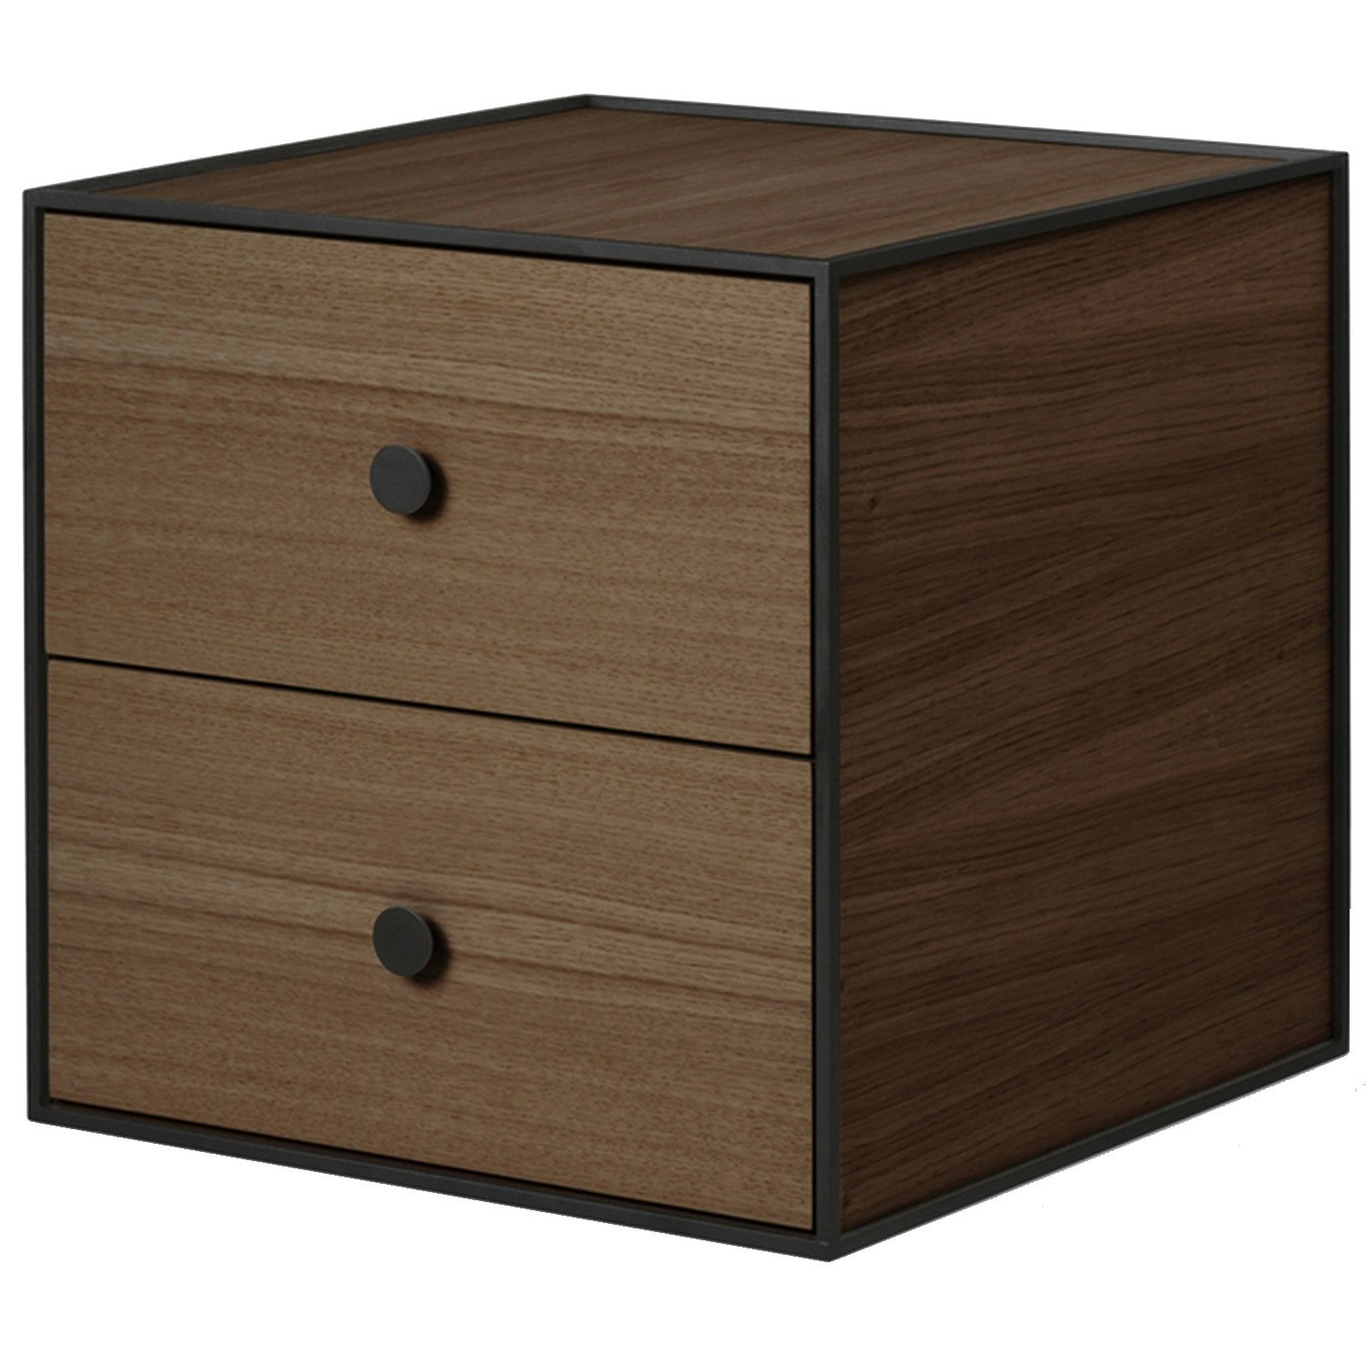 Frame 35 Bedside Table With 2 Drawers, Smoked Oak